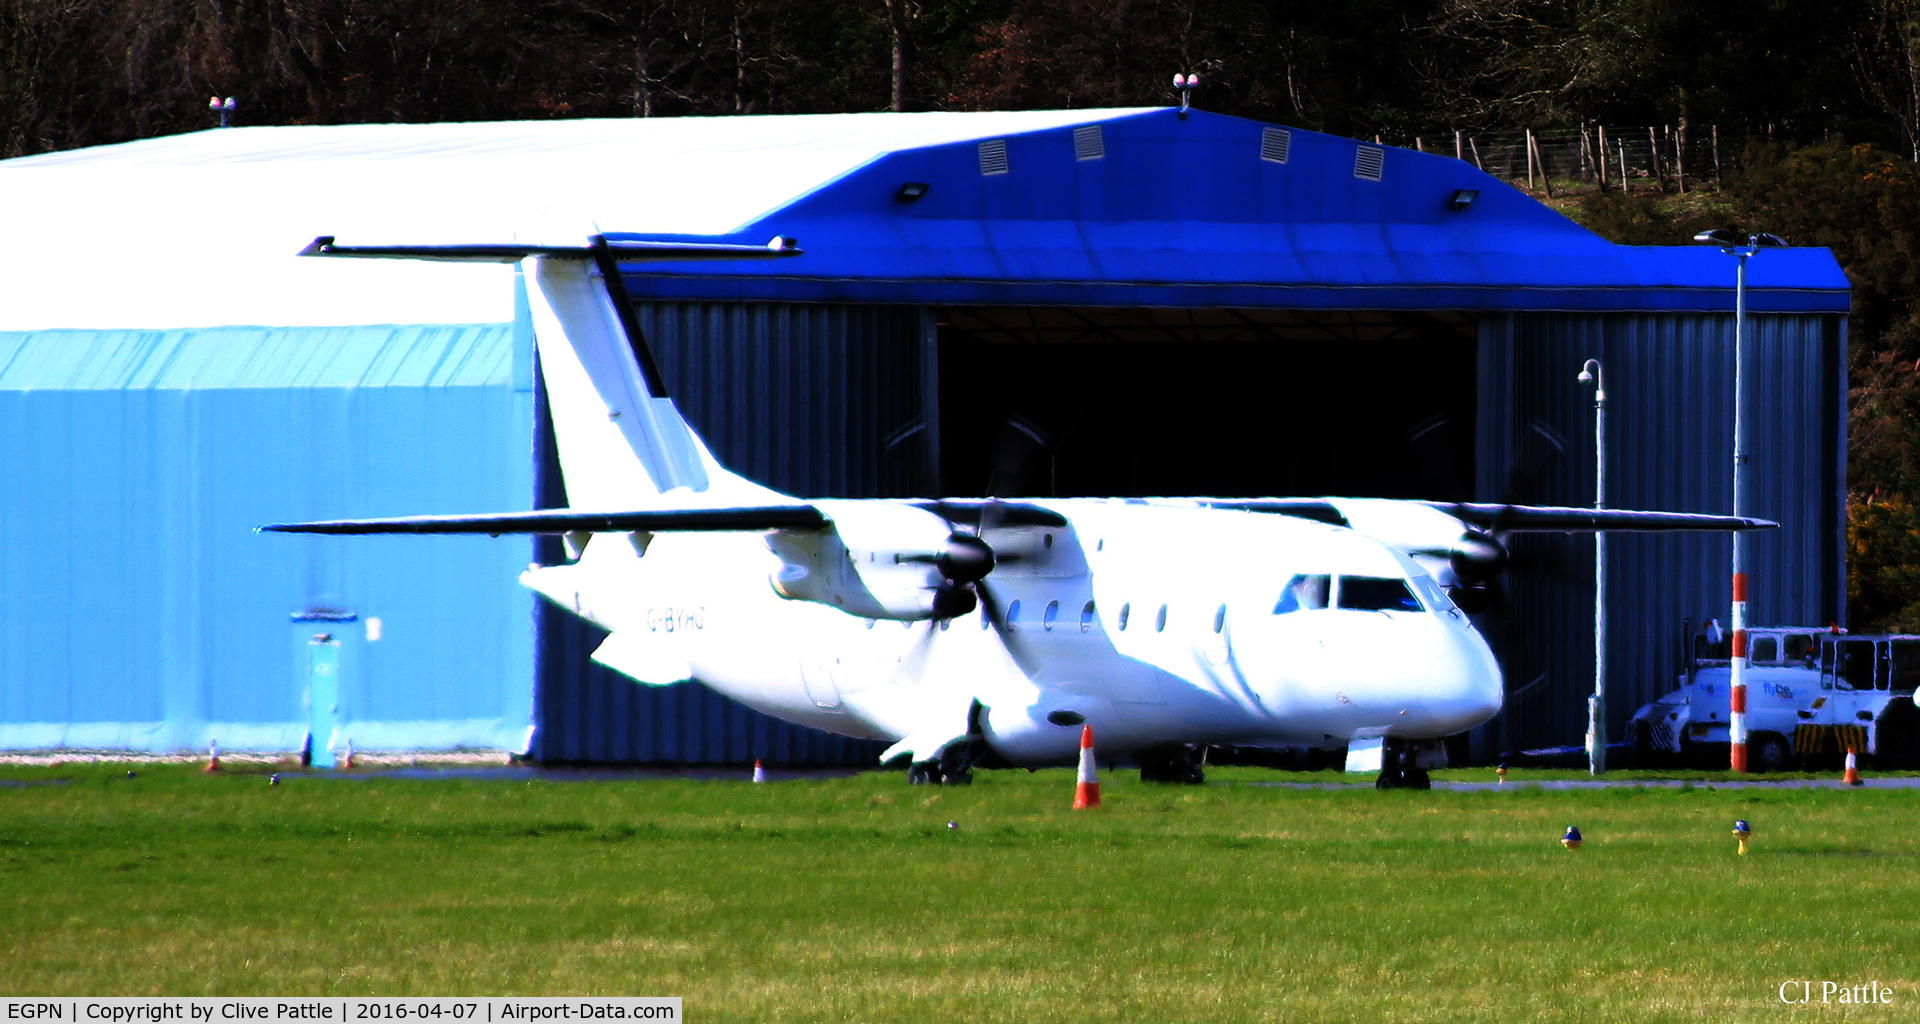 Dundee Airport, Dundee, Scotland United Kingdom (EGPN) - Dundee Riverside EGPN/DND - G-BYHG taxies past the Loganair/Flybe engineering hangar